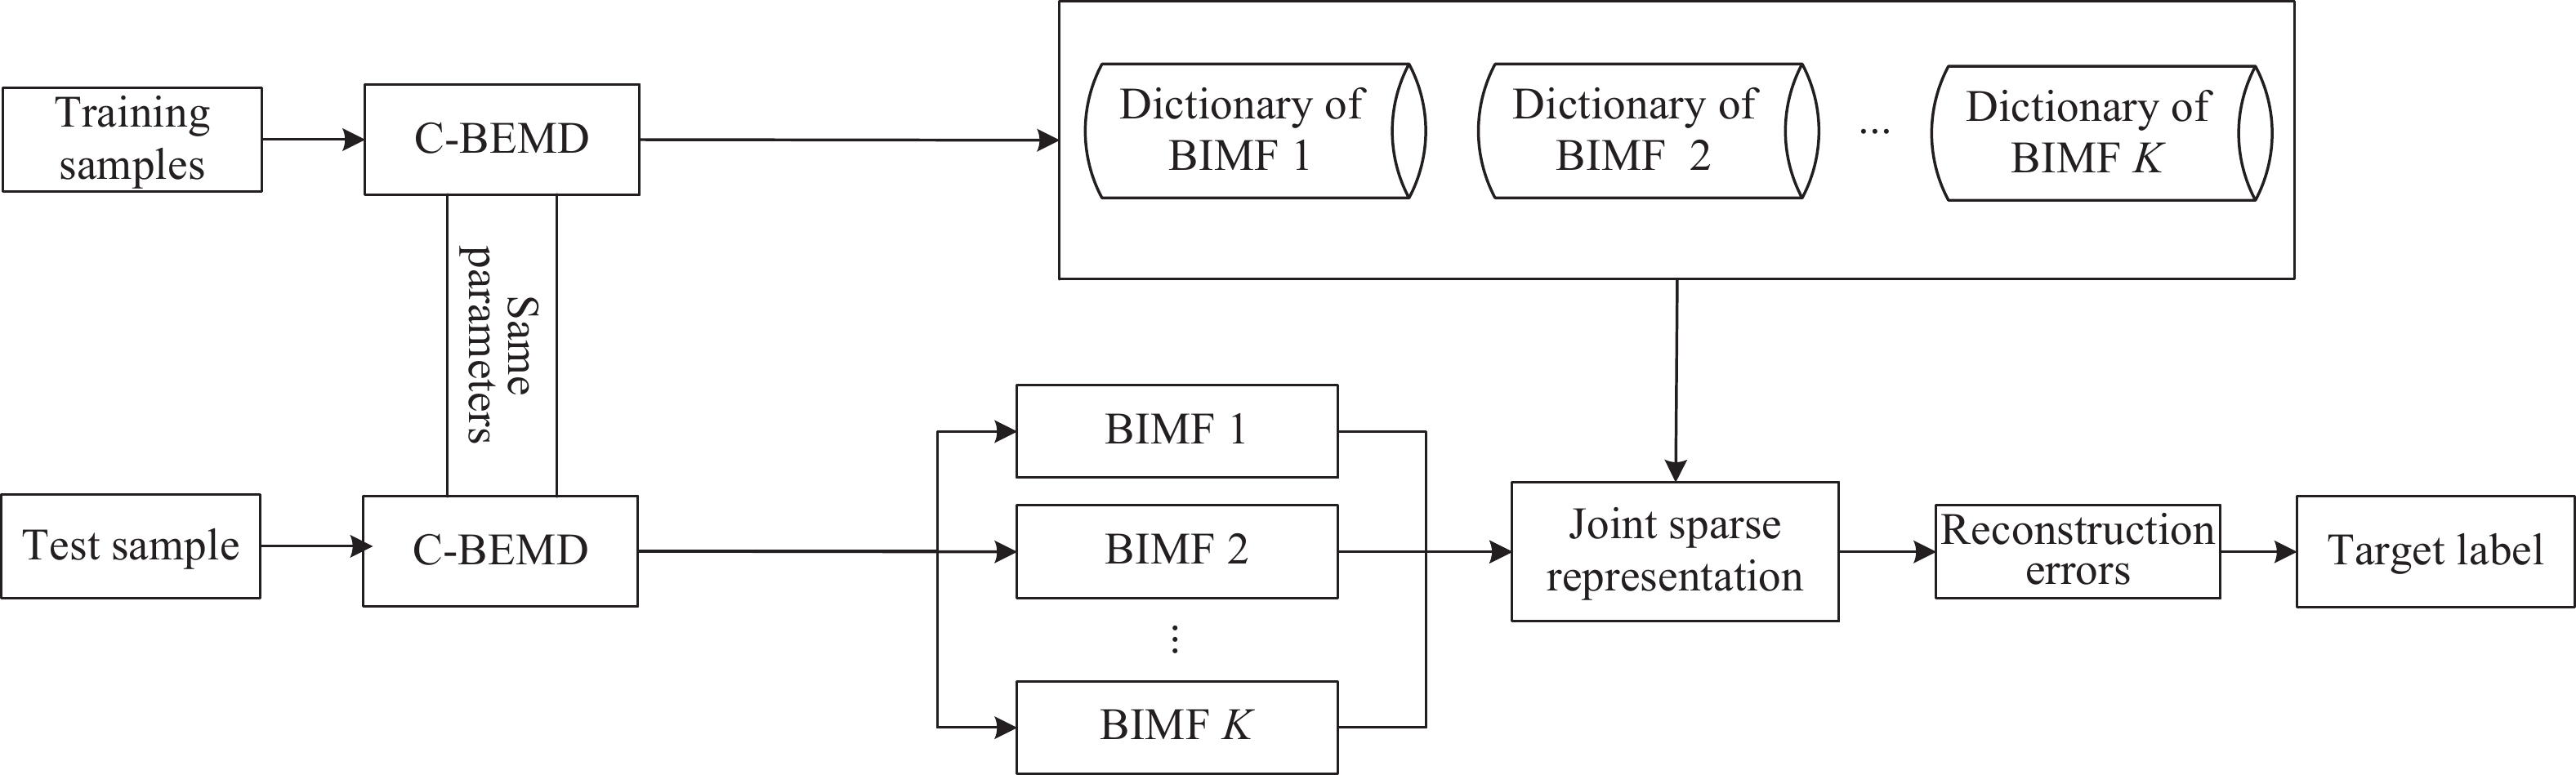 SAR target recognition method based on feature extraction by C-BEMD